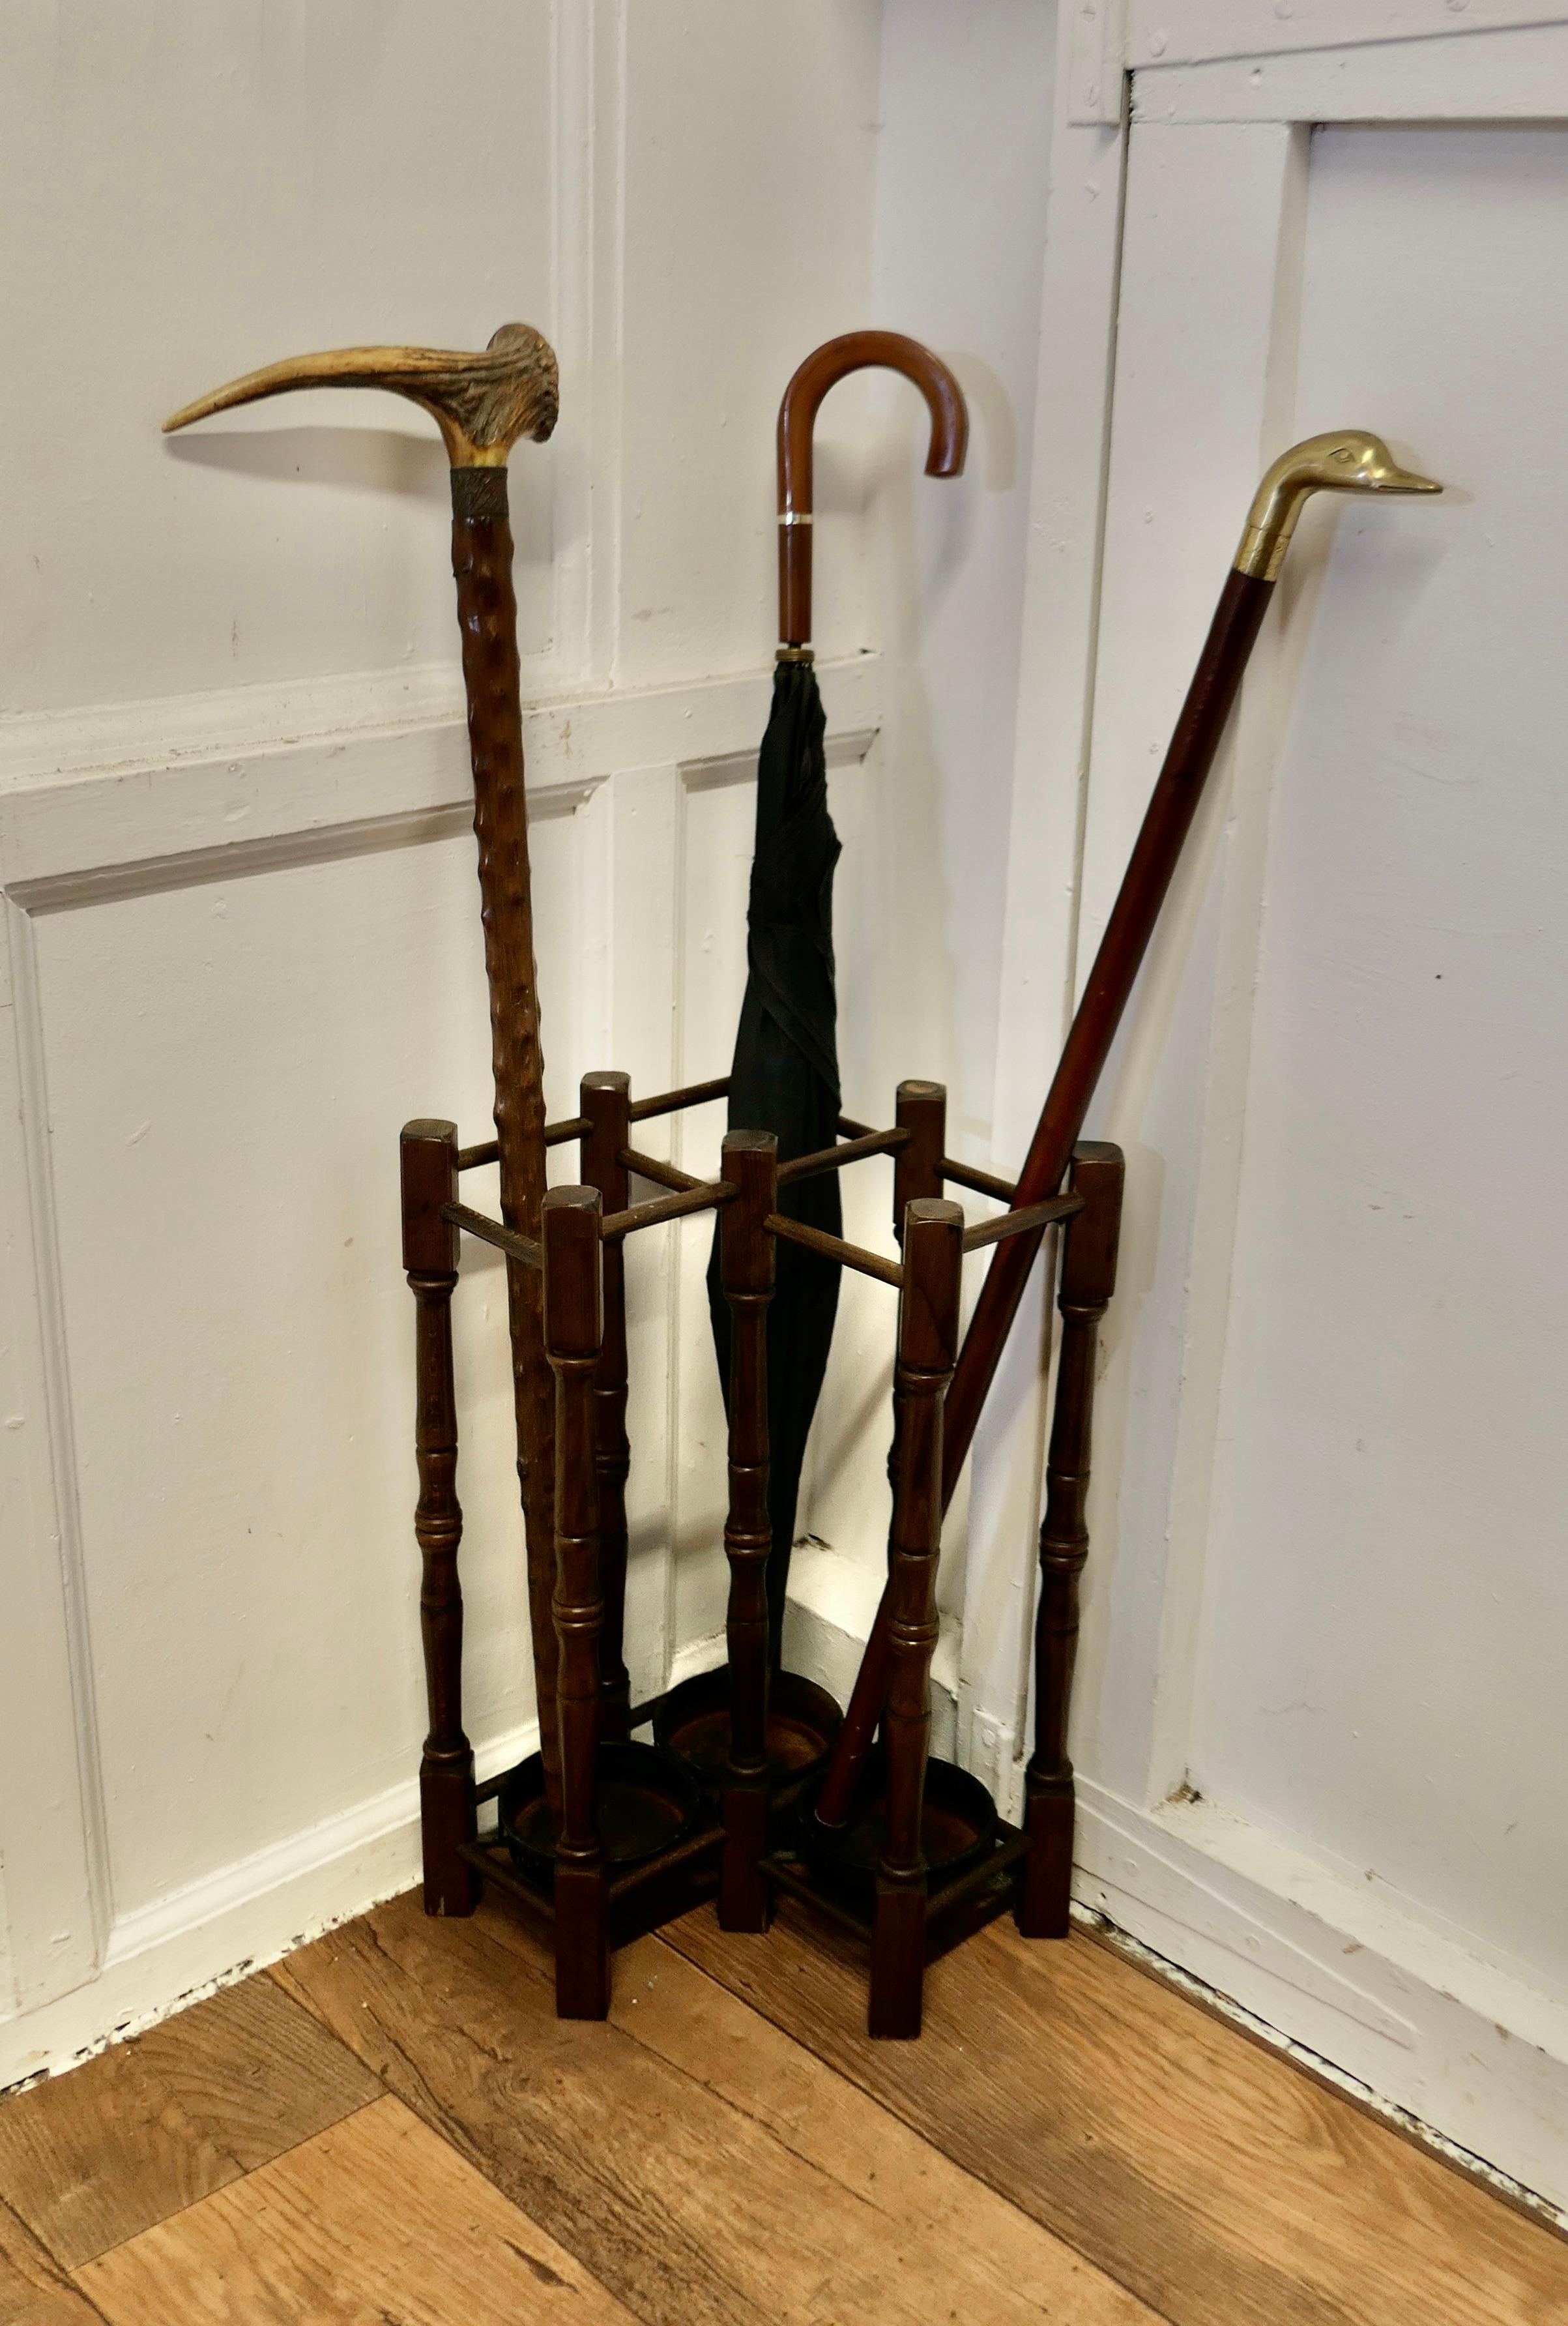 A Turned Beech Corner Stick and Umbrella Stand

This is a very unusual piece, it is made from dark turned beech spindles and it fits very neatly into a corner, it has 3 large sections with a removable drip tray at the bottom each
The stand is 21”